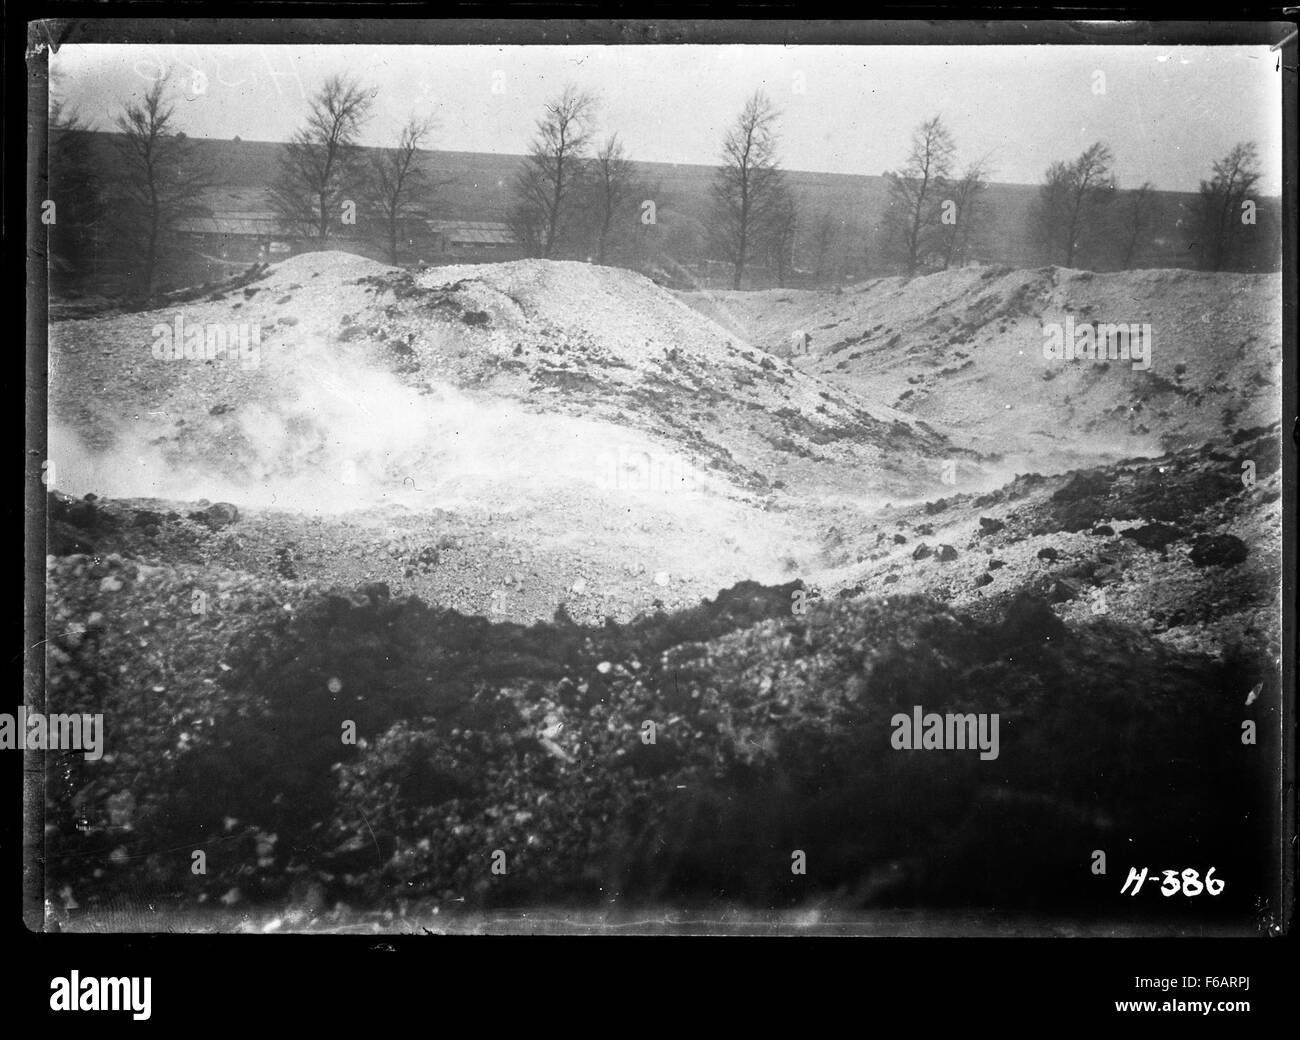 The crater caused by the destruction of damaged German explosives, Stock Photo